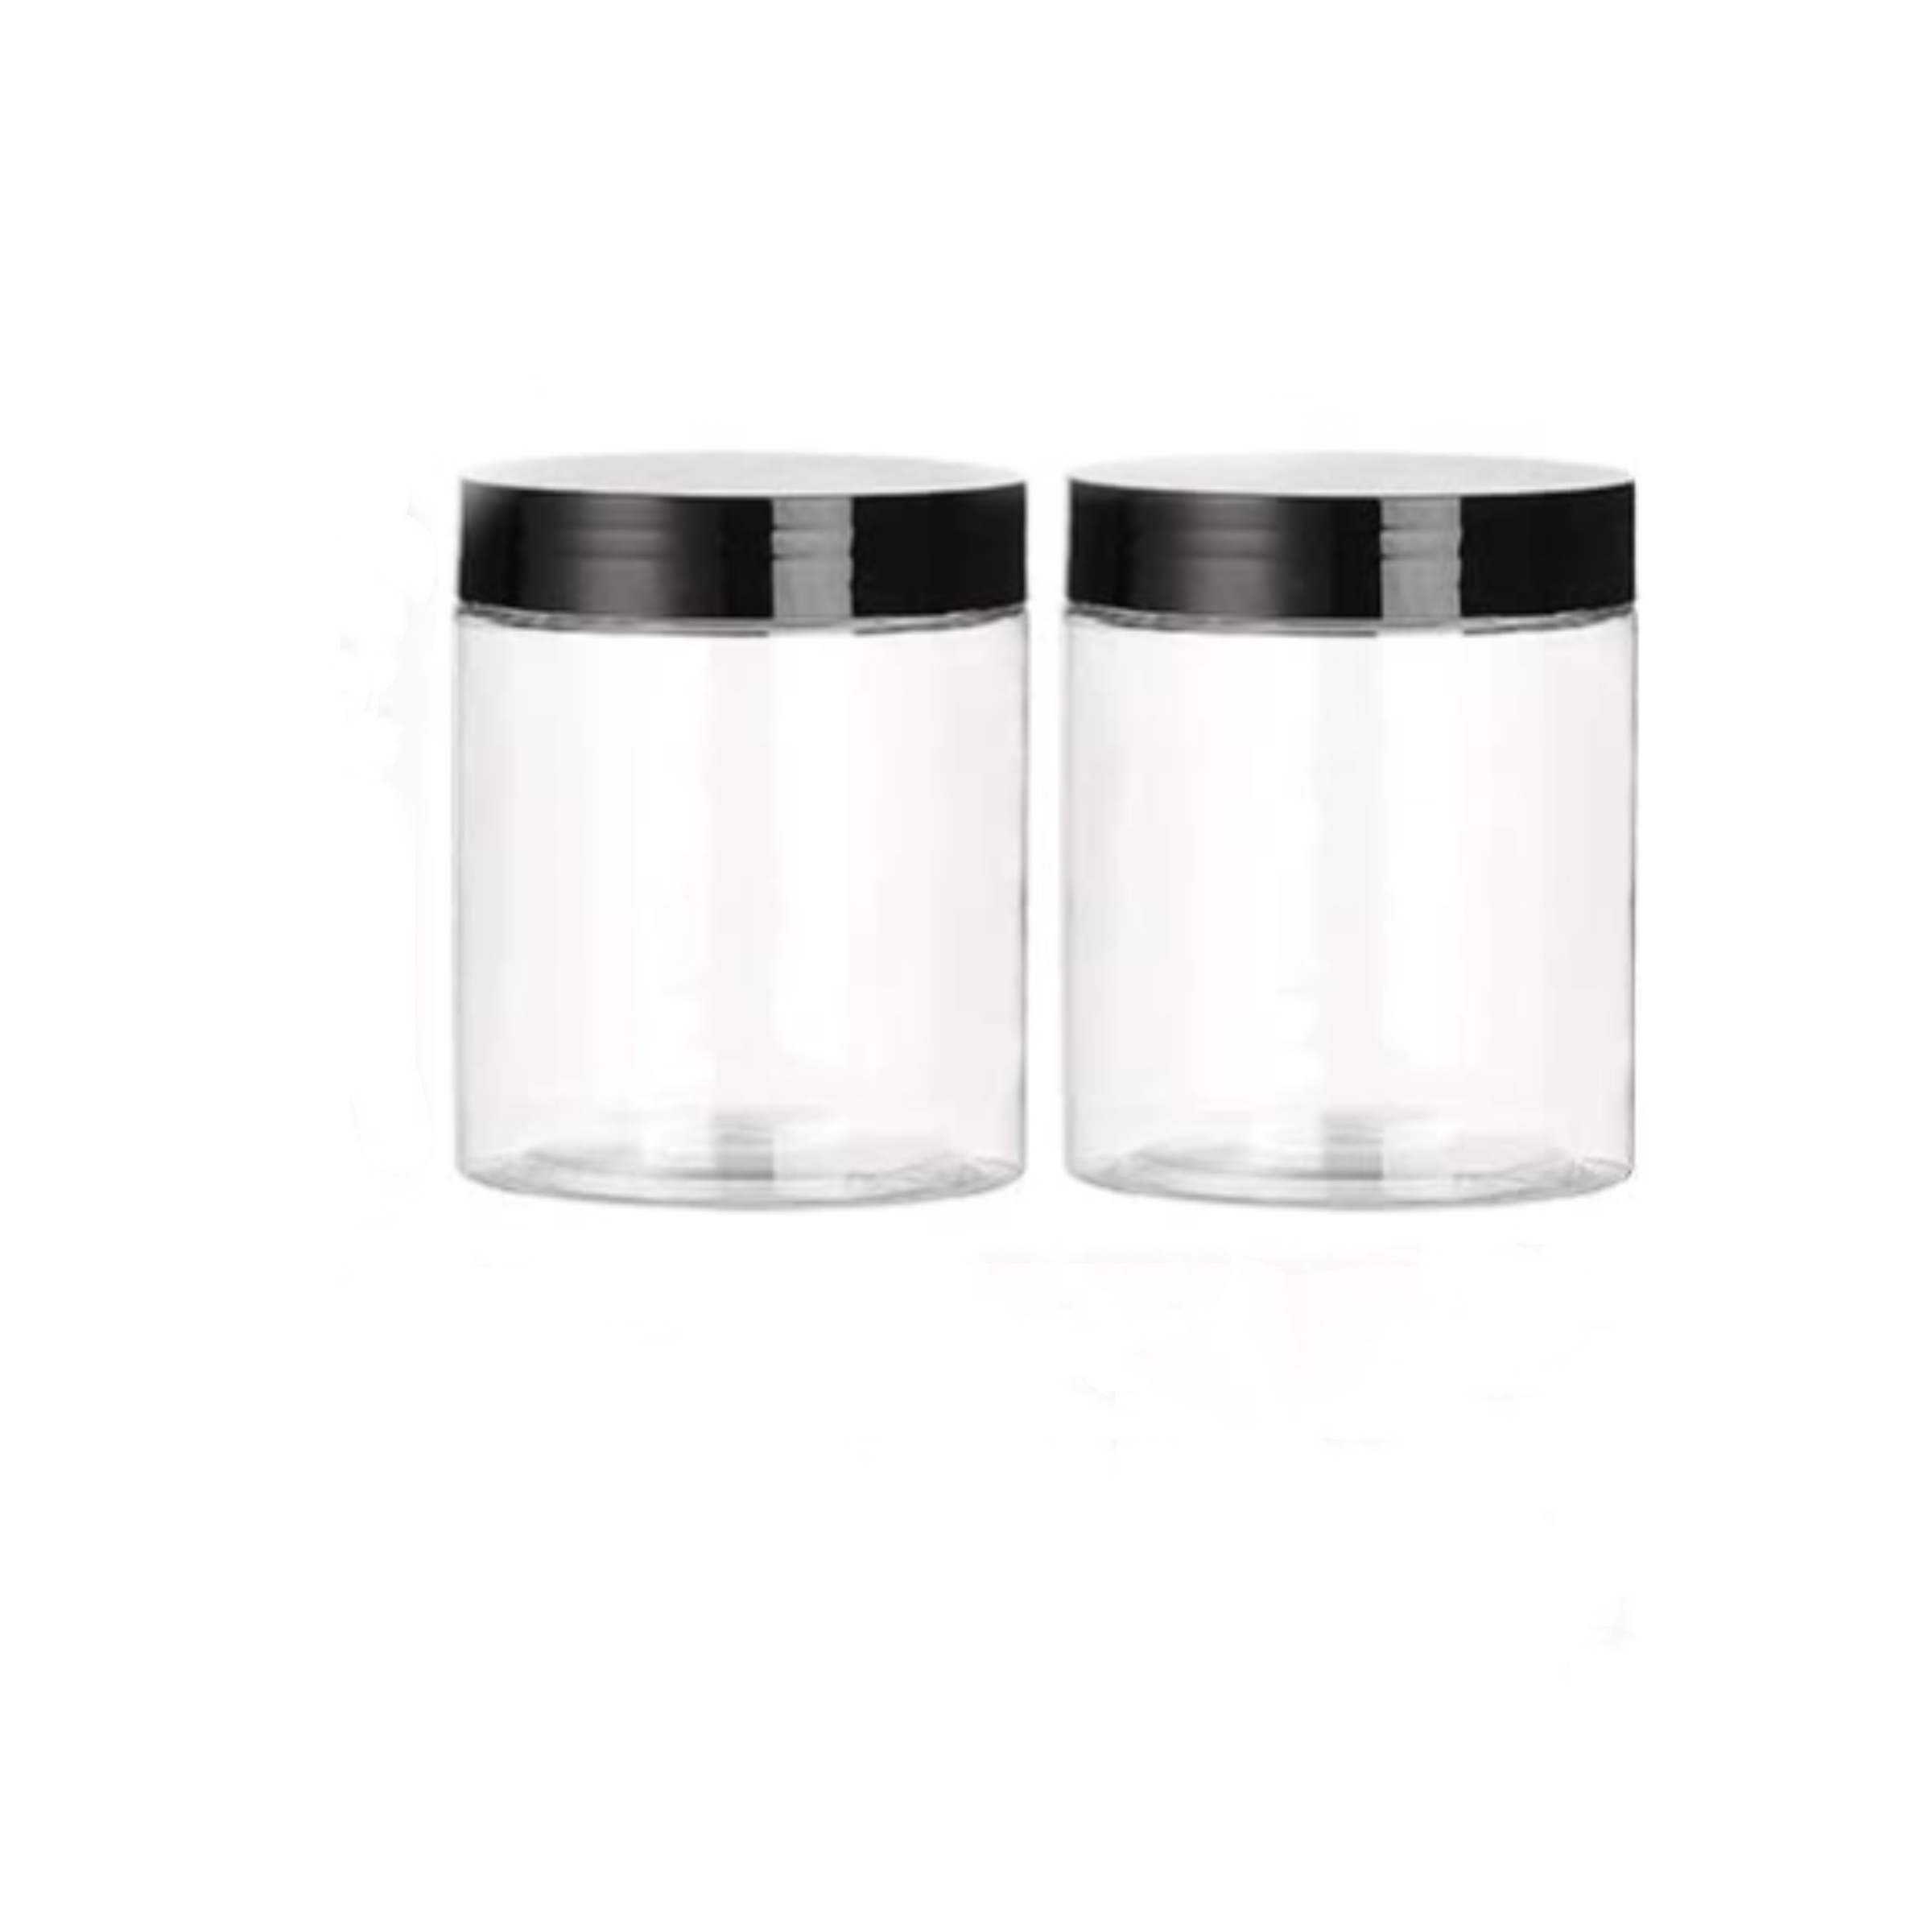 CLEAR PLASTIC CONTAINERS for Slime Twisted Lid Jars Screw on Slime Jars 1  Oz 2 Oz 4 Oz 6 Oz 8 Oz Jars 5 Pcs Set Slime Storage Jars for Craft 